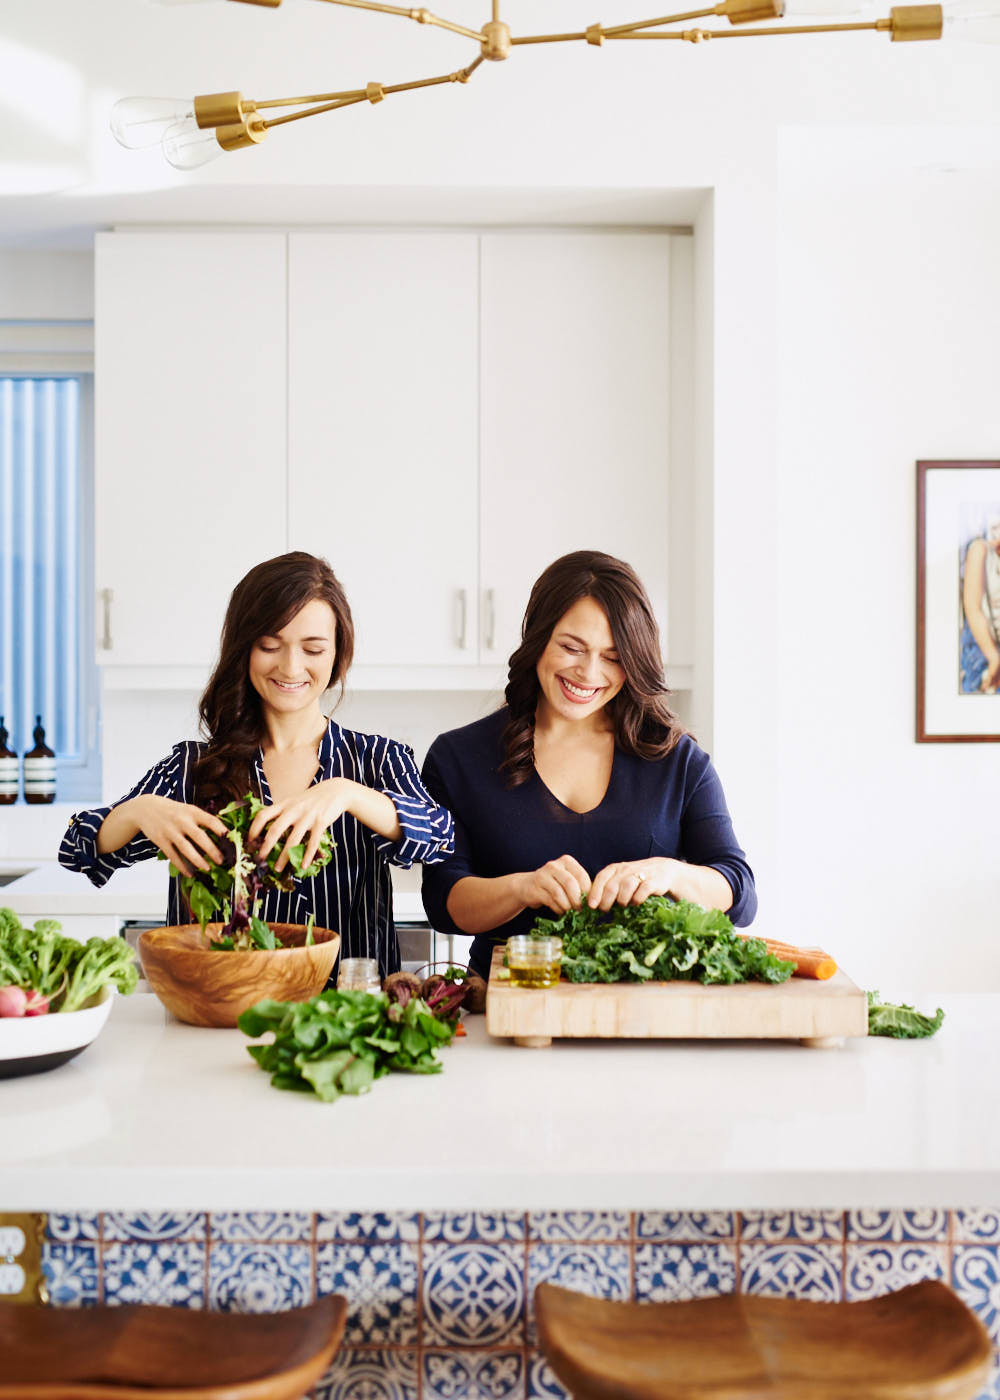 Lifestyle photography of two female small business owners preparing food in modern kitchen